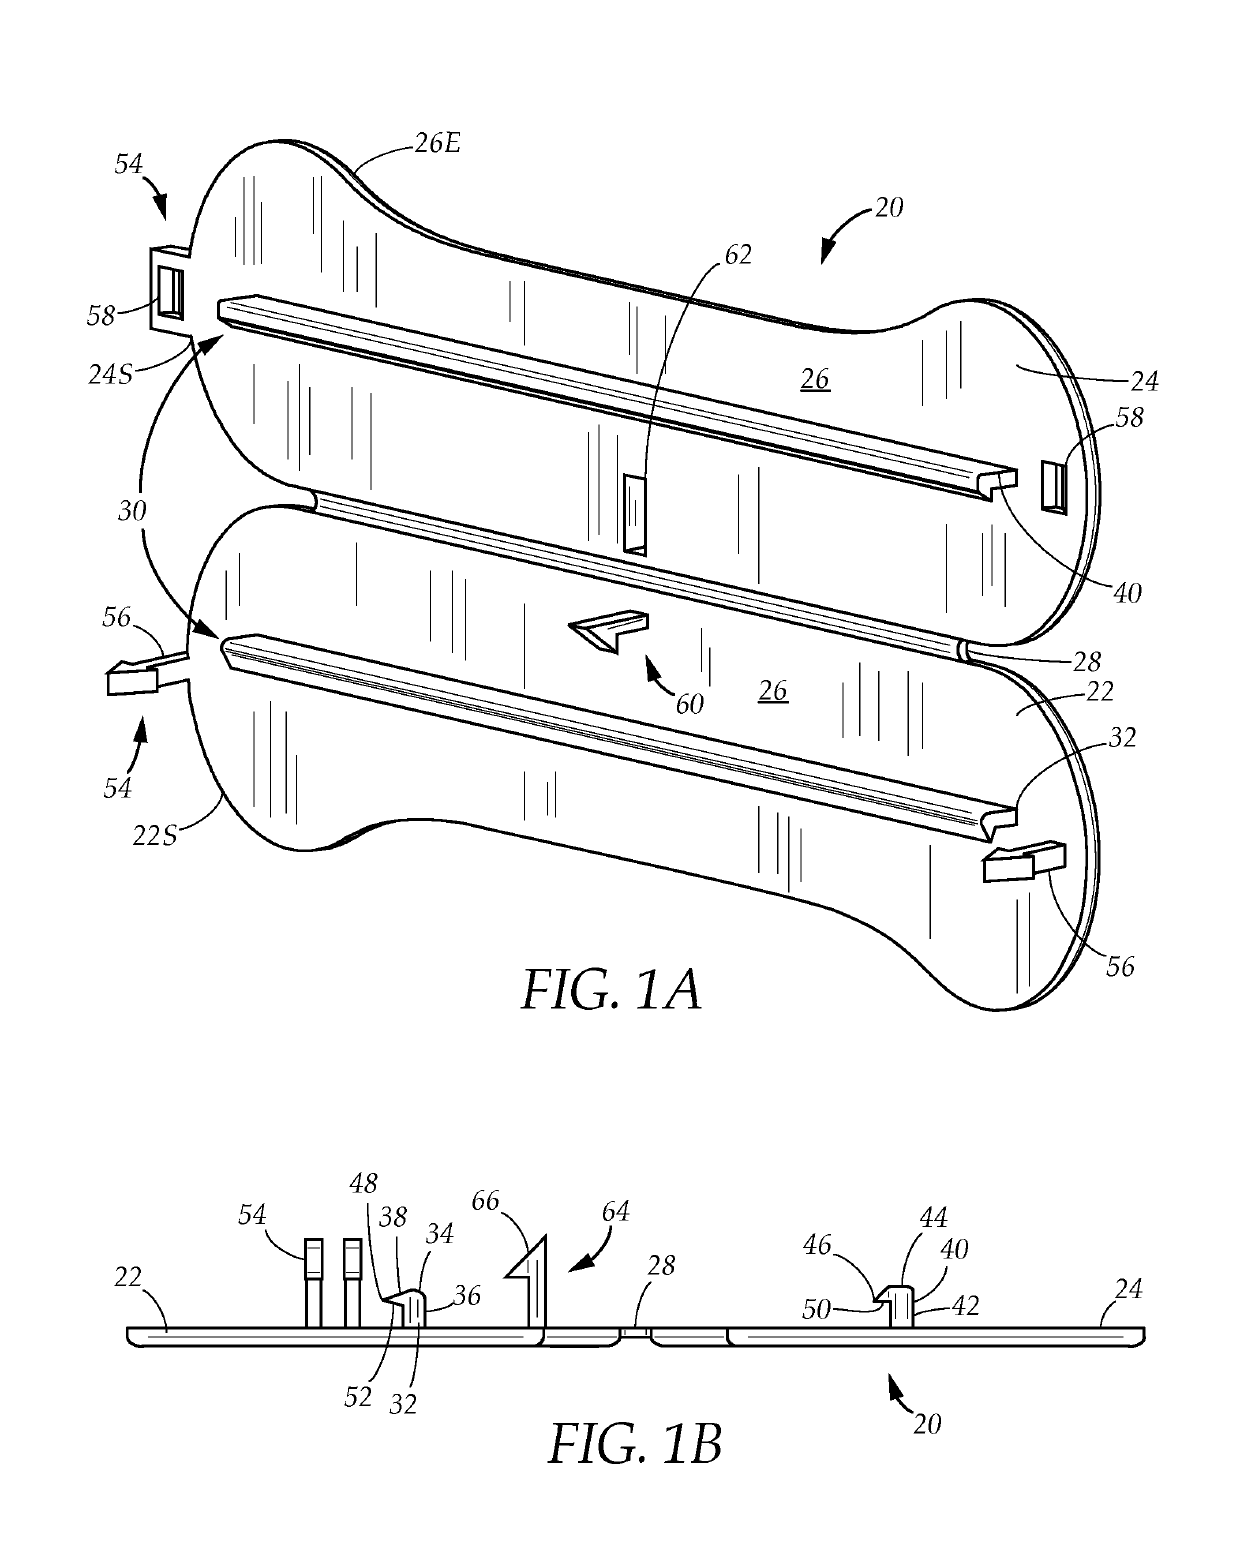 Coupling and uncoupling apparatus with lockable mechanism for bags and packages